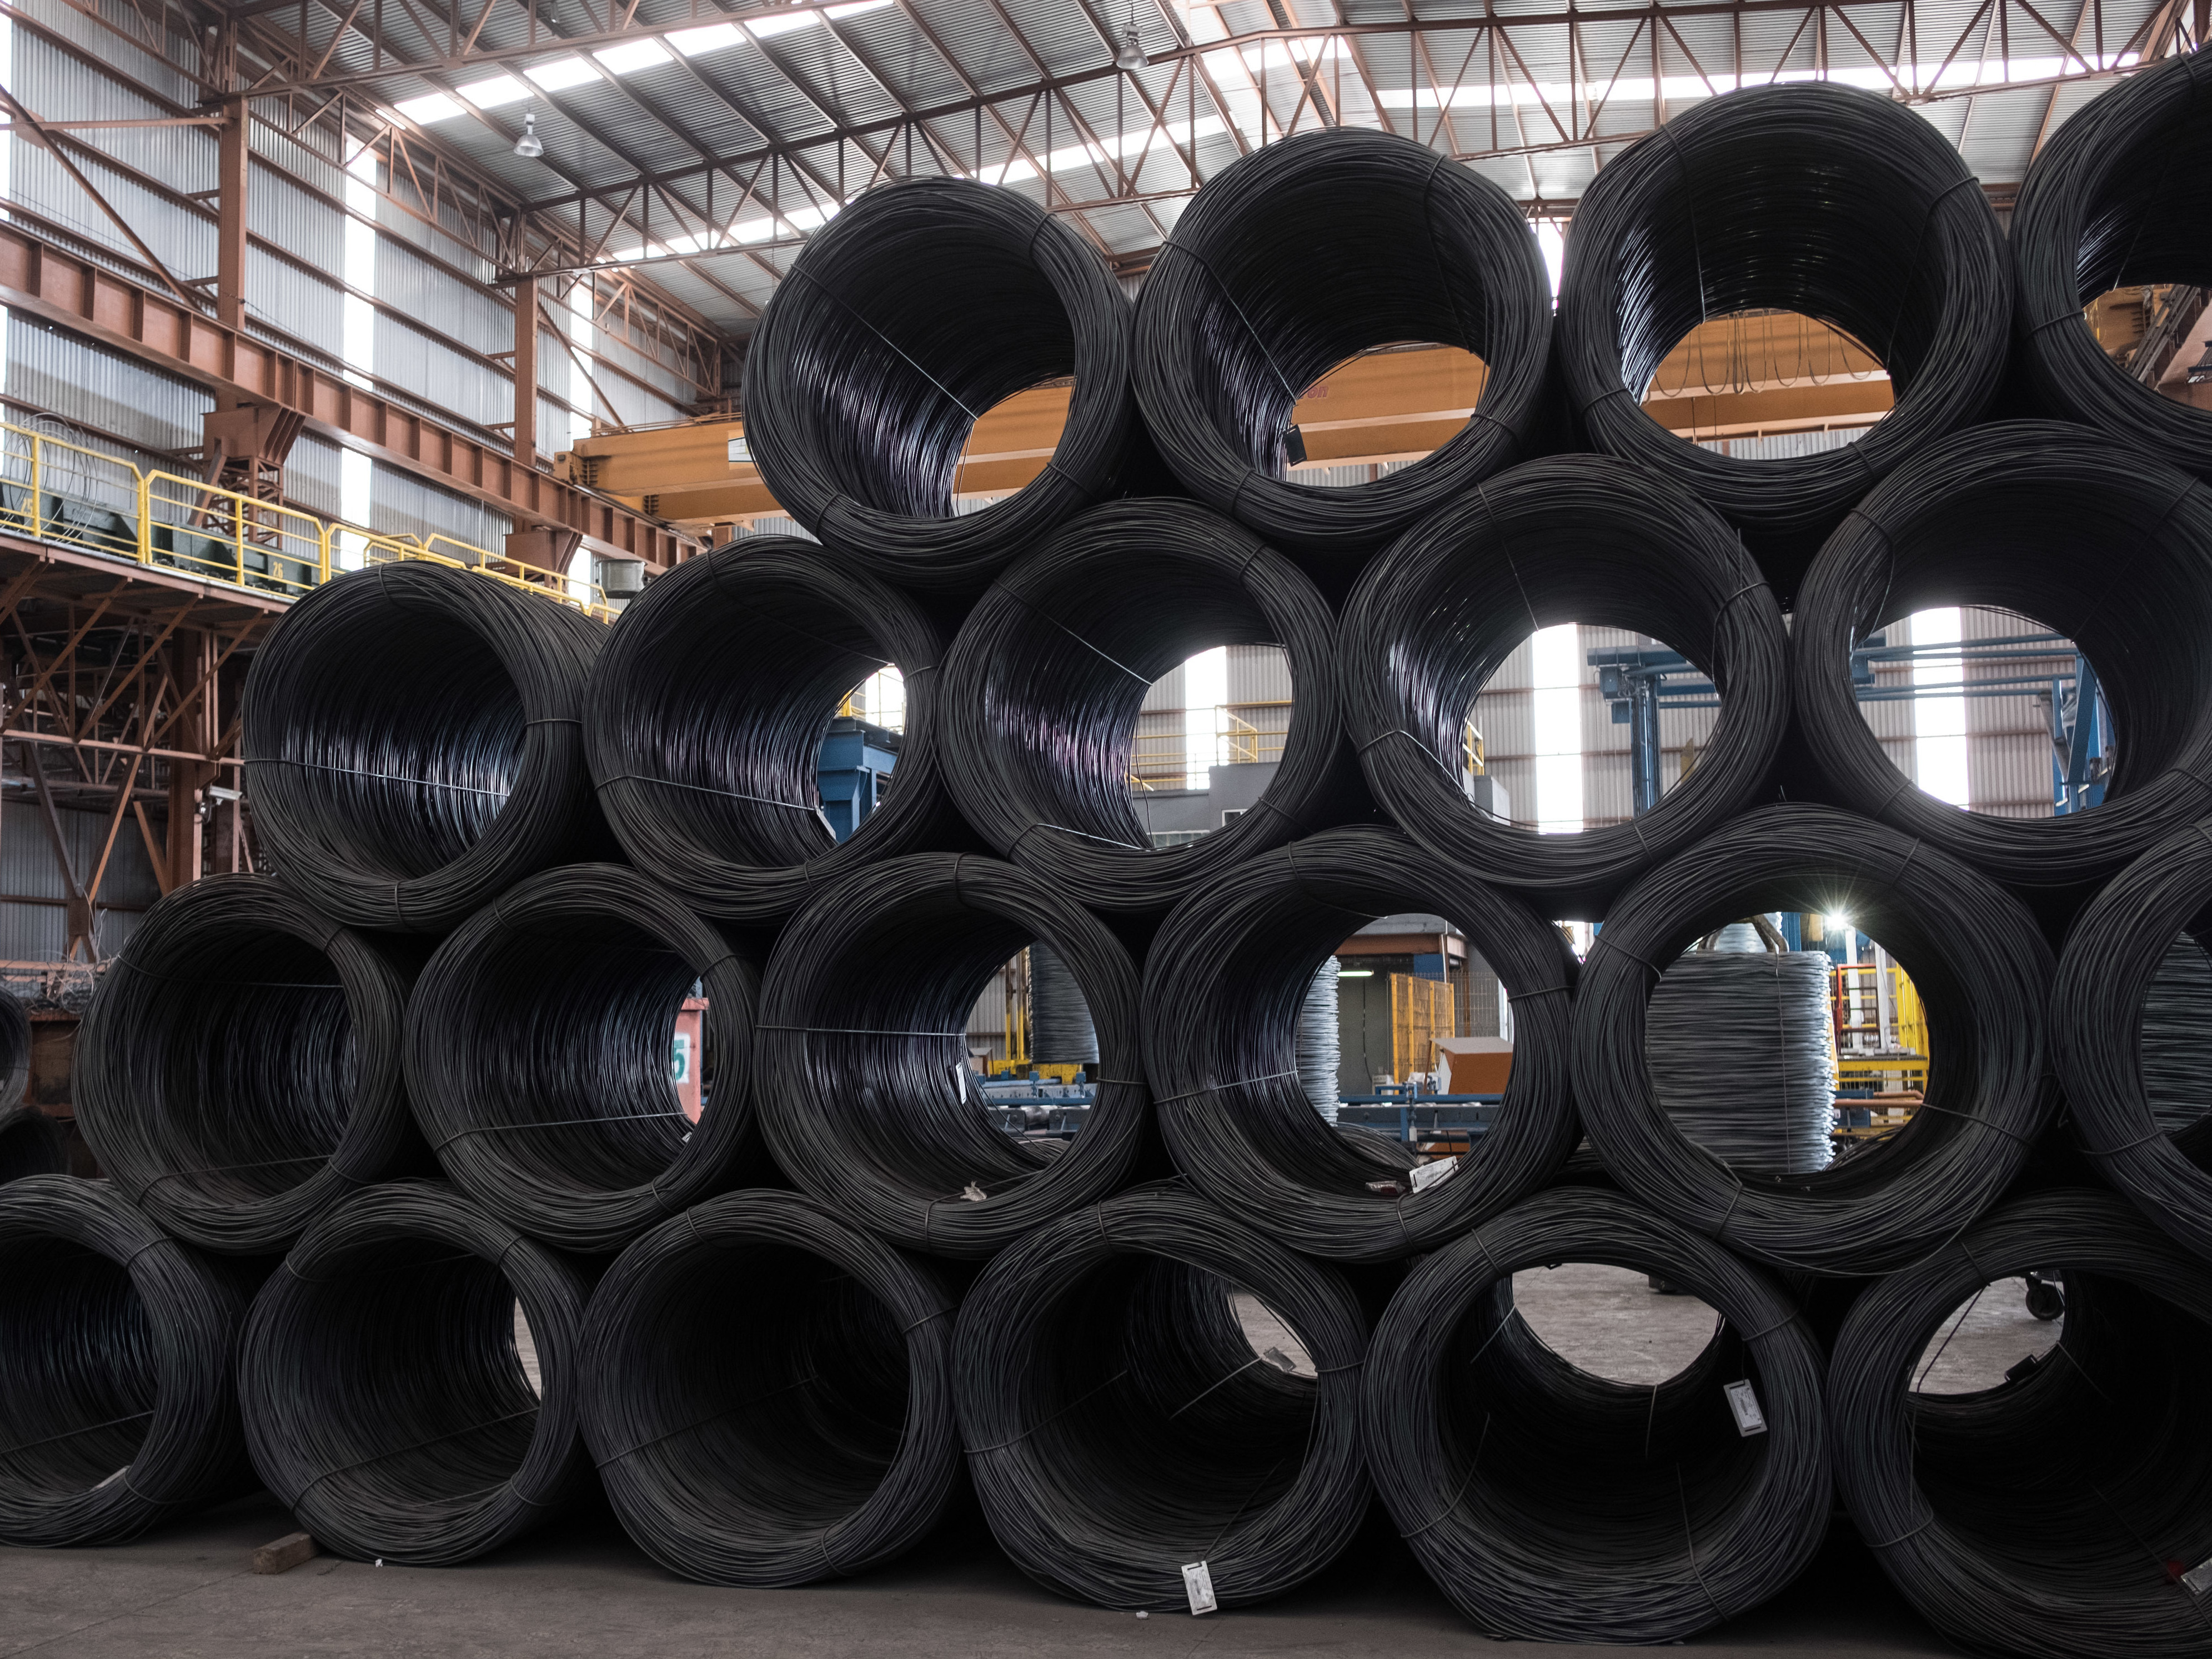 Coils of steel wire sit stacked in the shipping area of the Grupo Acerero SA steel processing facility in San Luis Potosi, Mexico, on March 6. (Photo by Bloomberg via Getty Images)